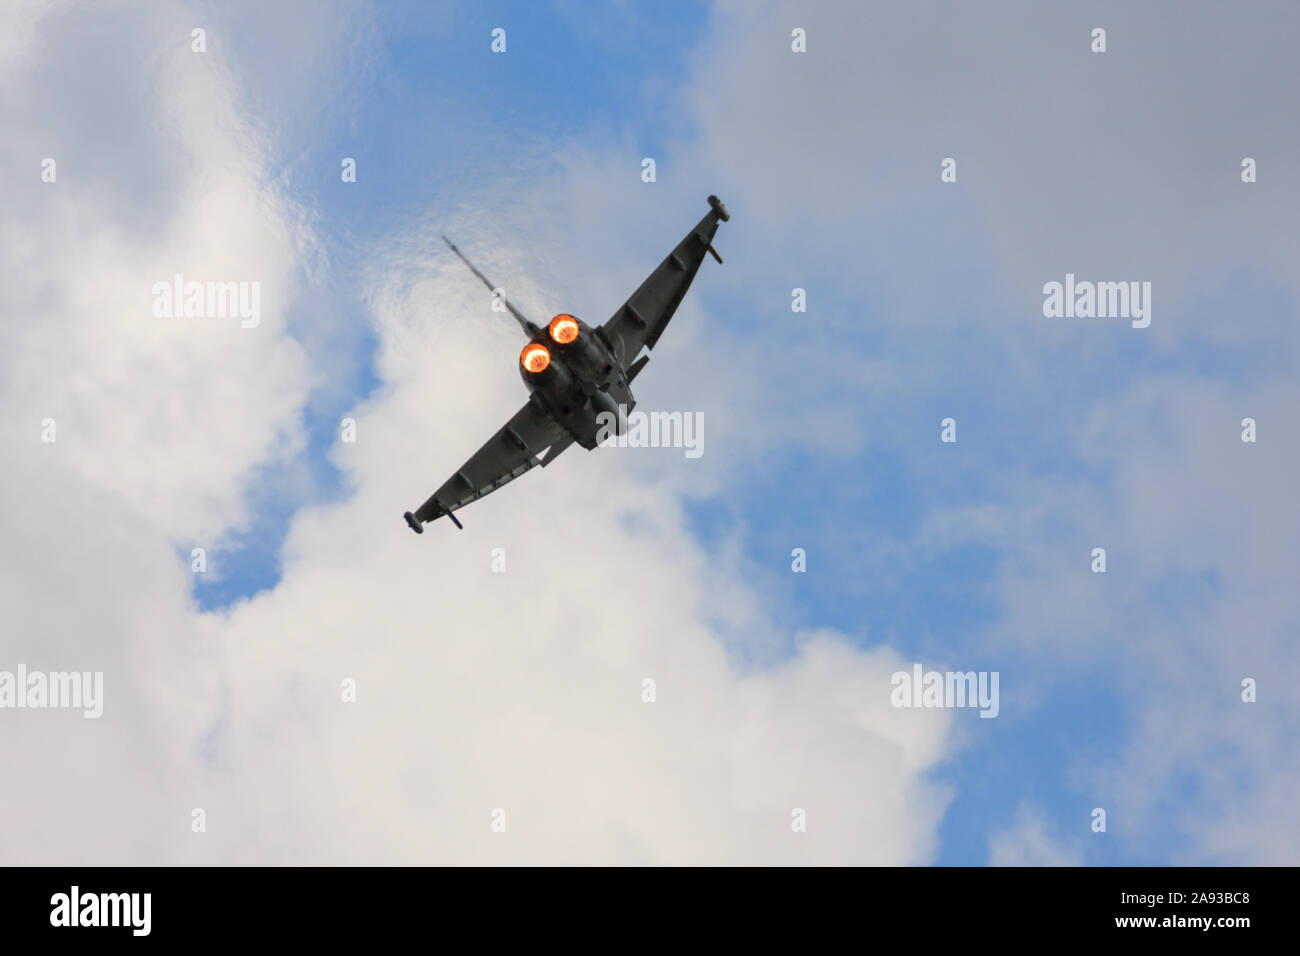 Rear view of an airborne RAF Typhoon multirole jet fighter, showing the engines re-heat (afterburners) full on. Climbing out against a blue sky. Stock Photo